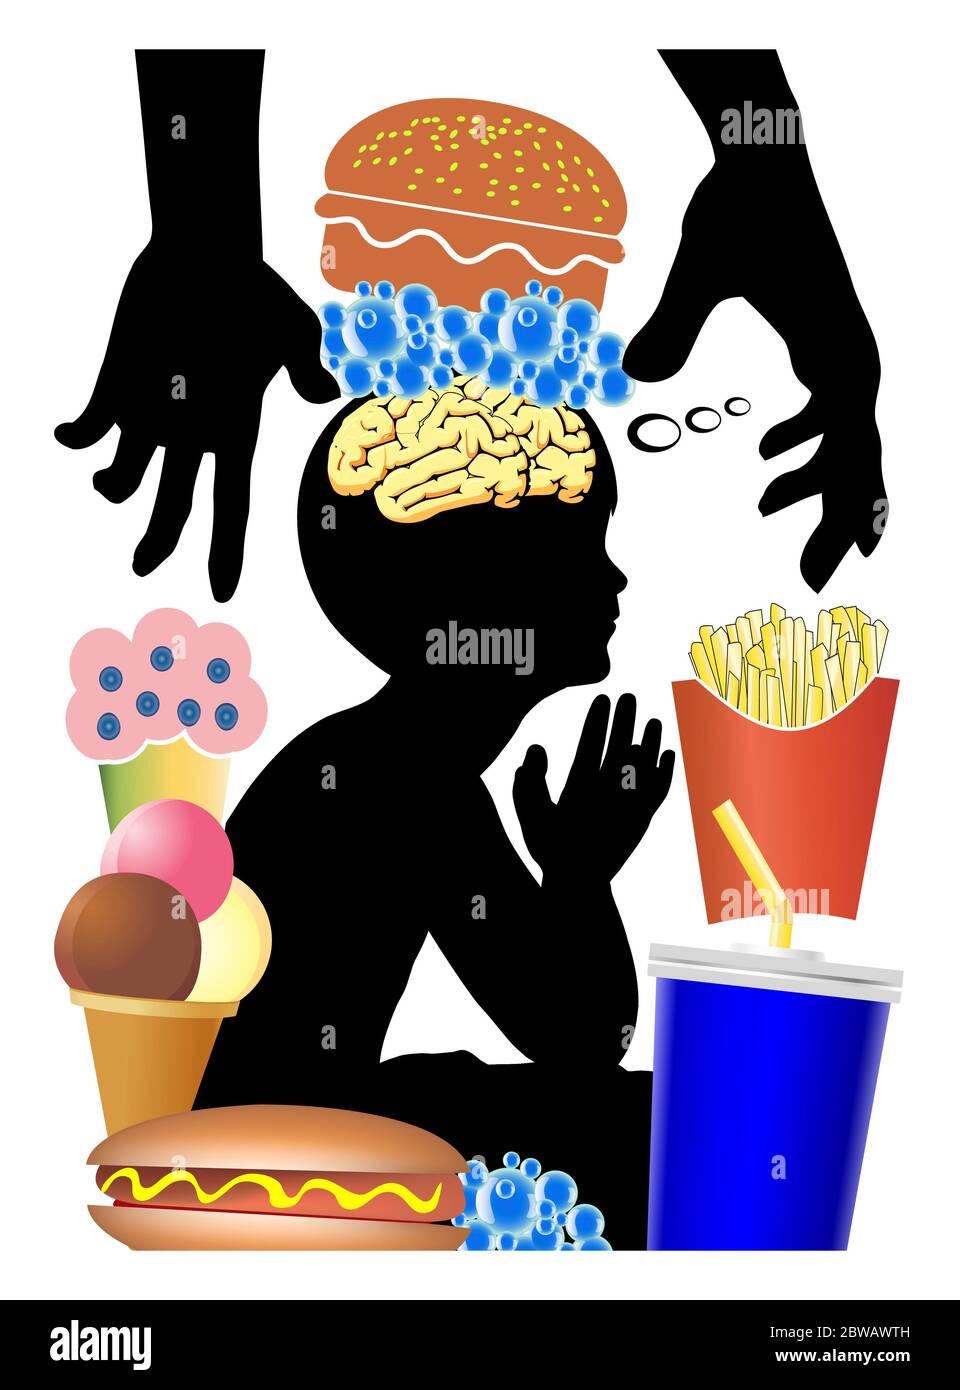 Eating habits of children get manipulated to crave for junk food like burger, sweets and soft drinks. Stock Photo